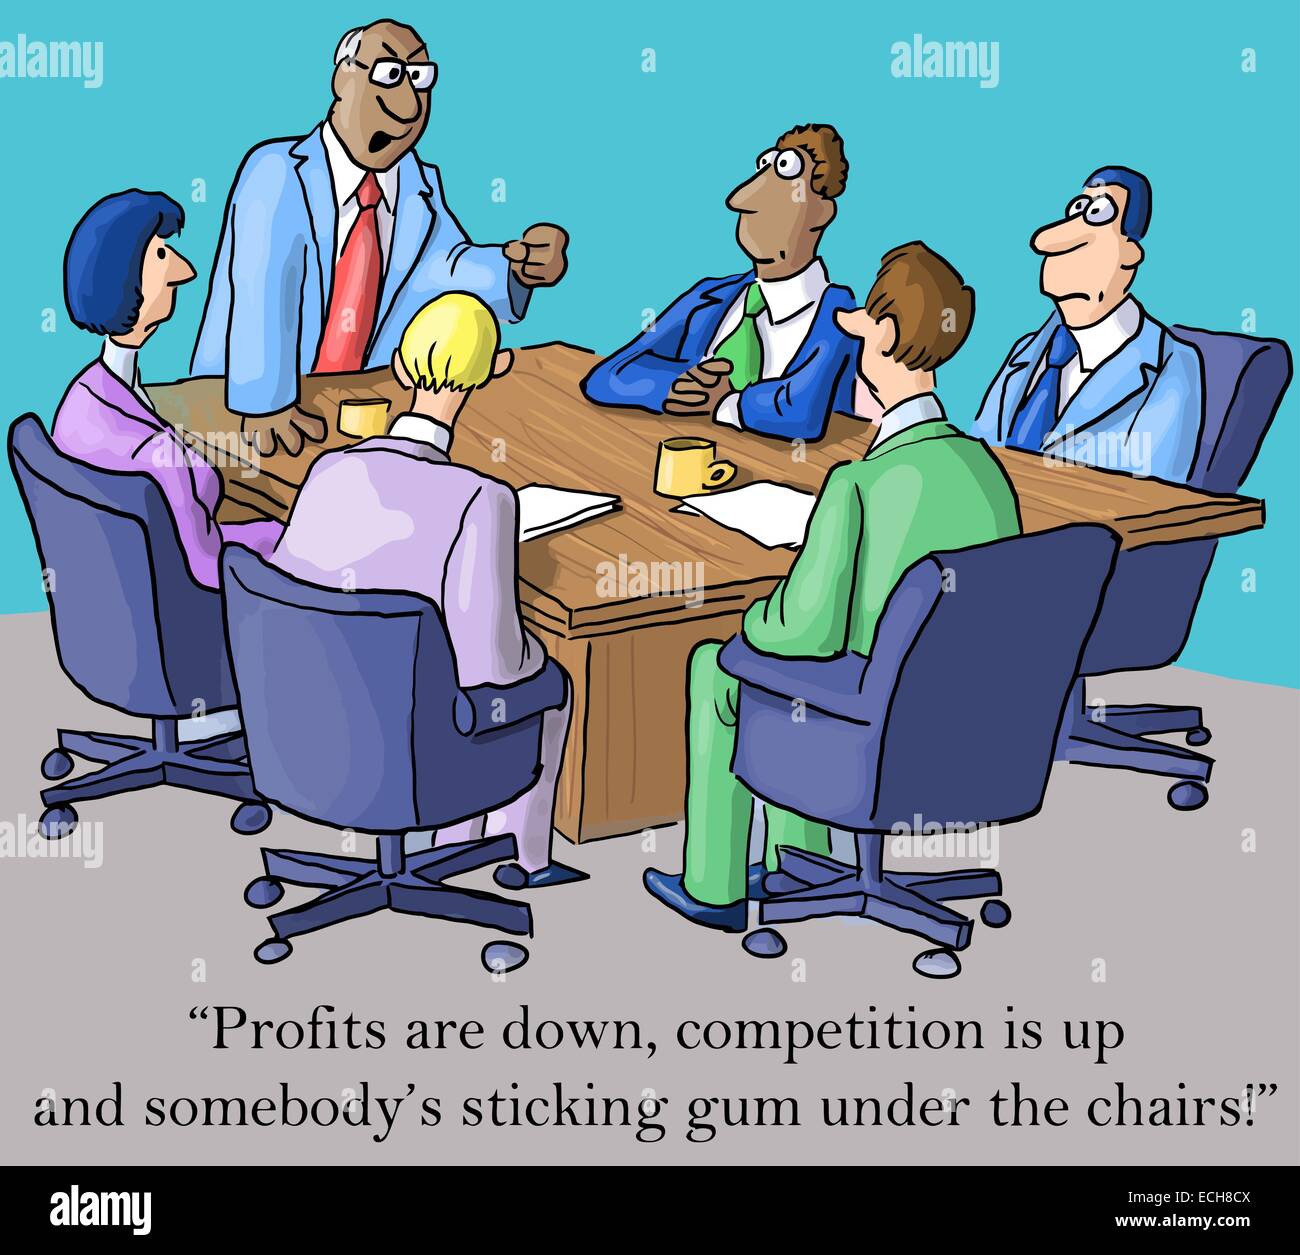 'Profits are down, competition is up and somebody's sticking gum under the chairs.' Stock Vector